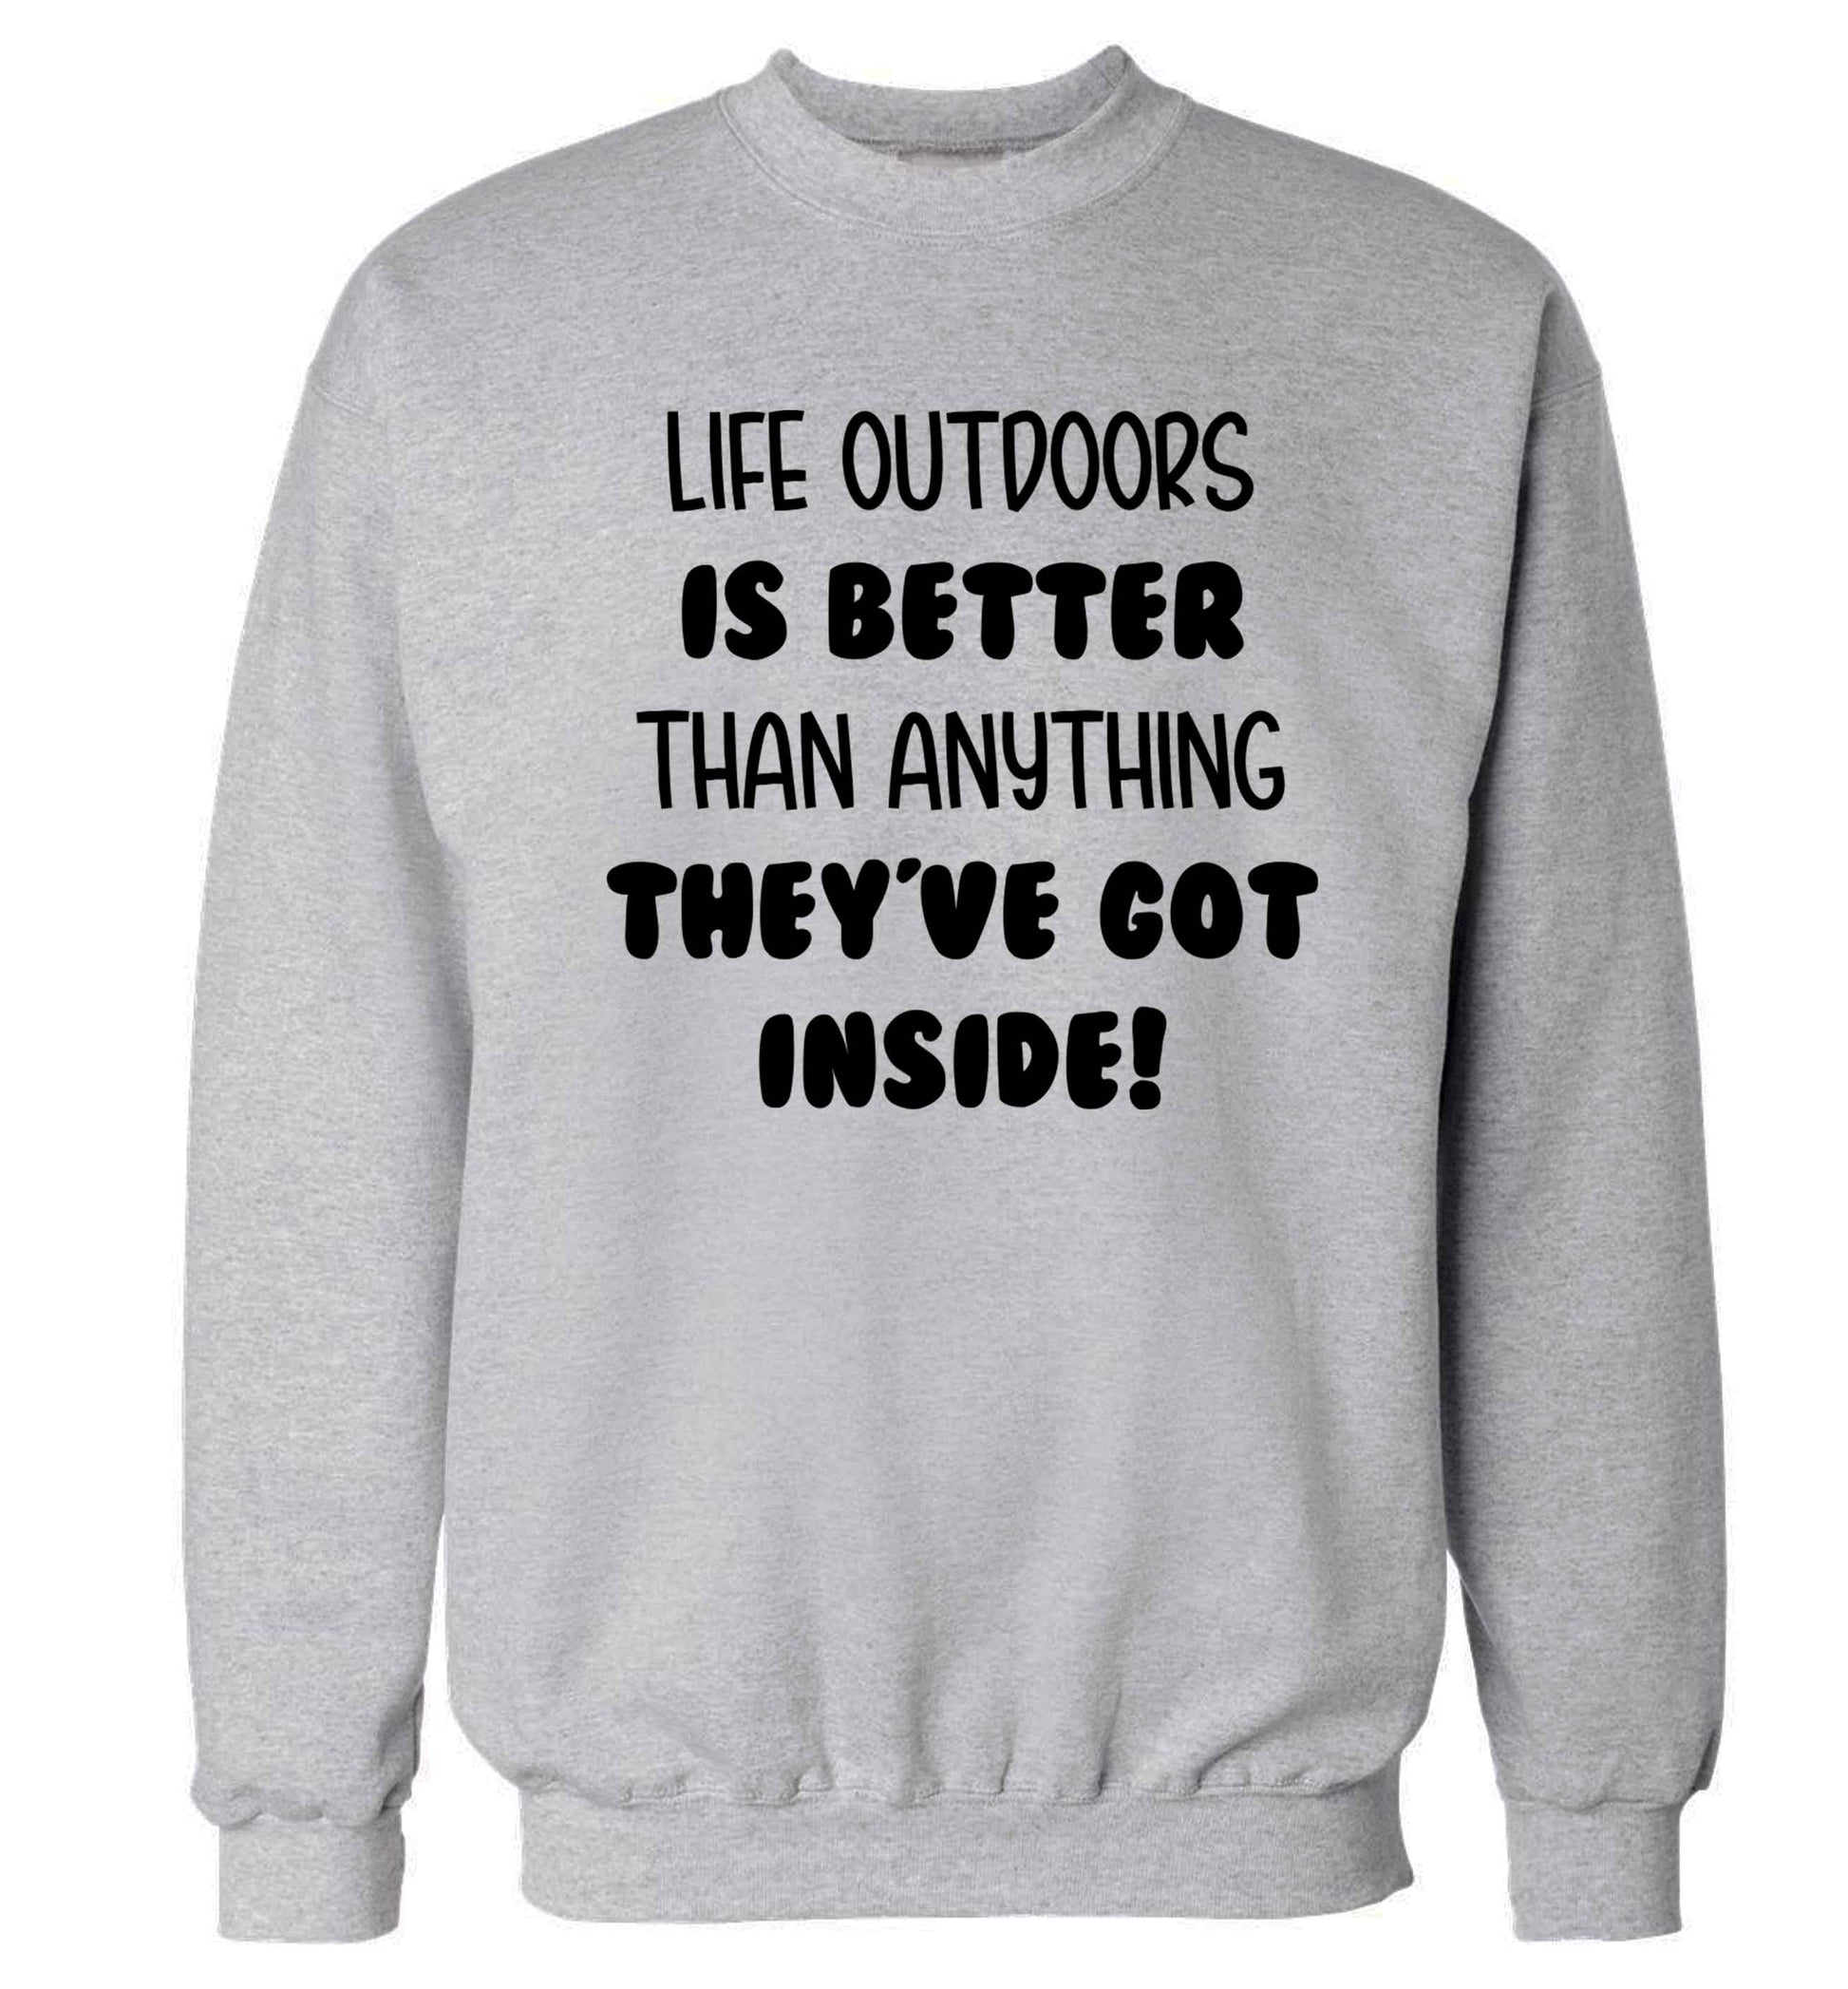 Life outdoors is better than anything they've go inside Adult's unisex grey Sweater 2XL